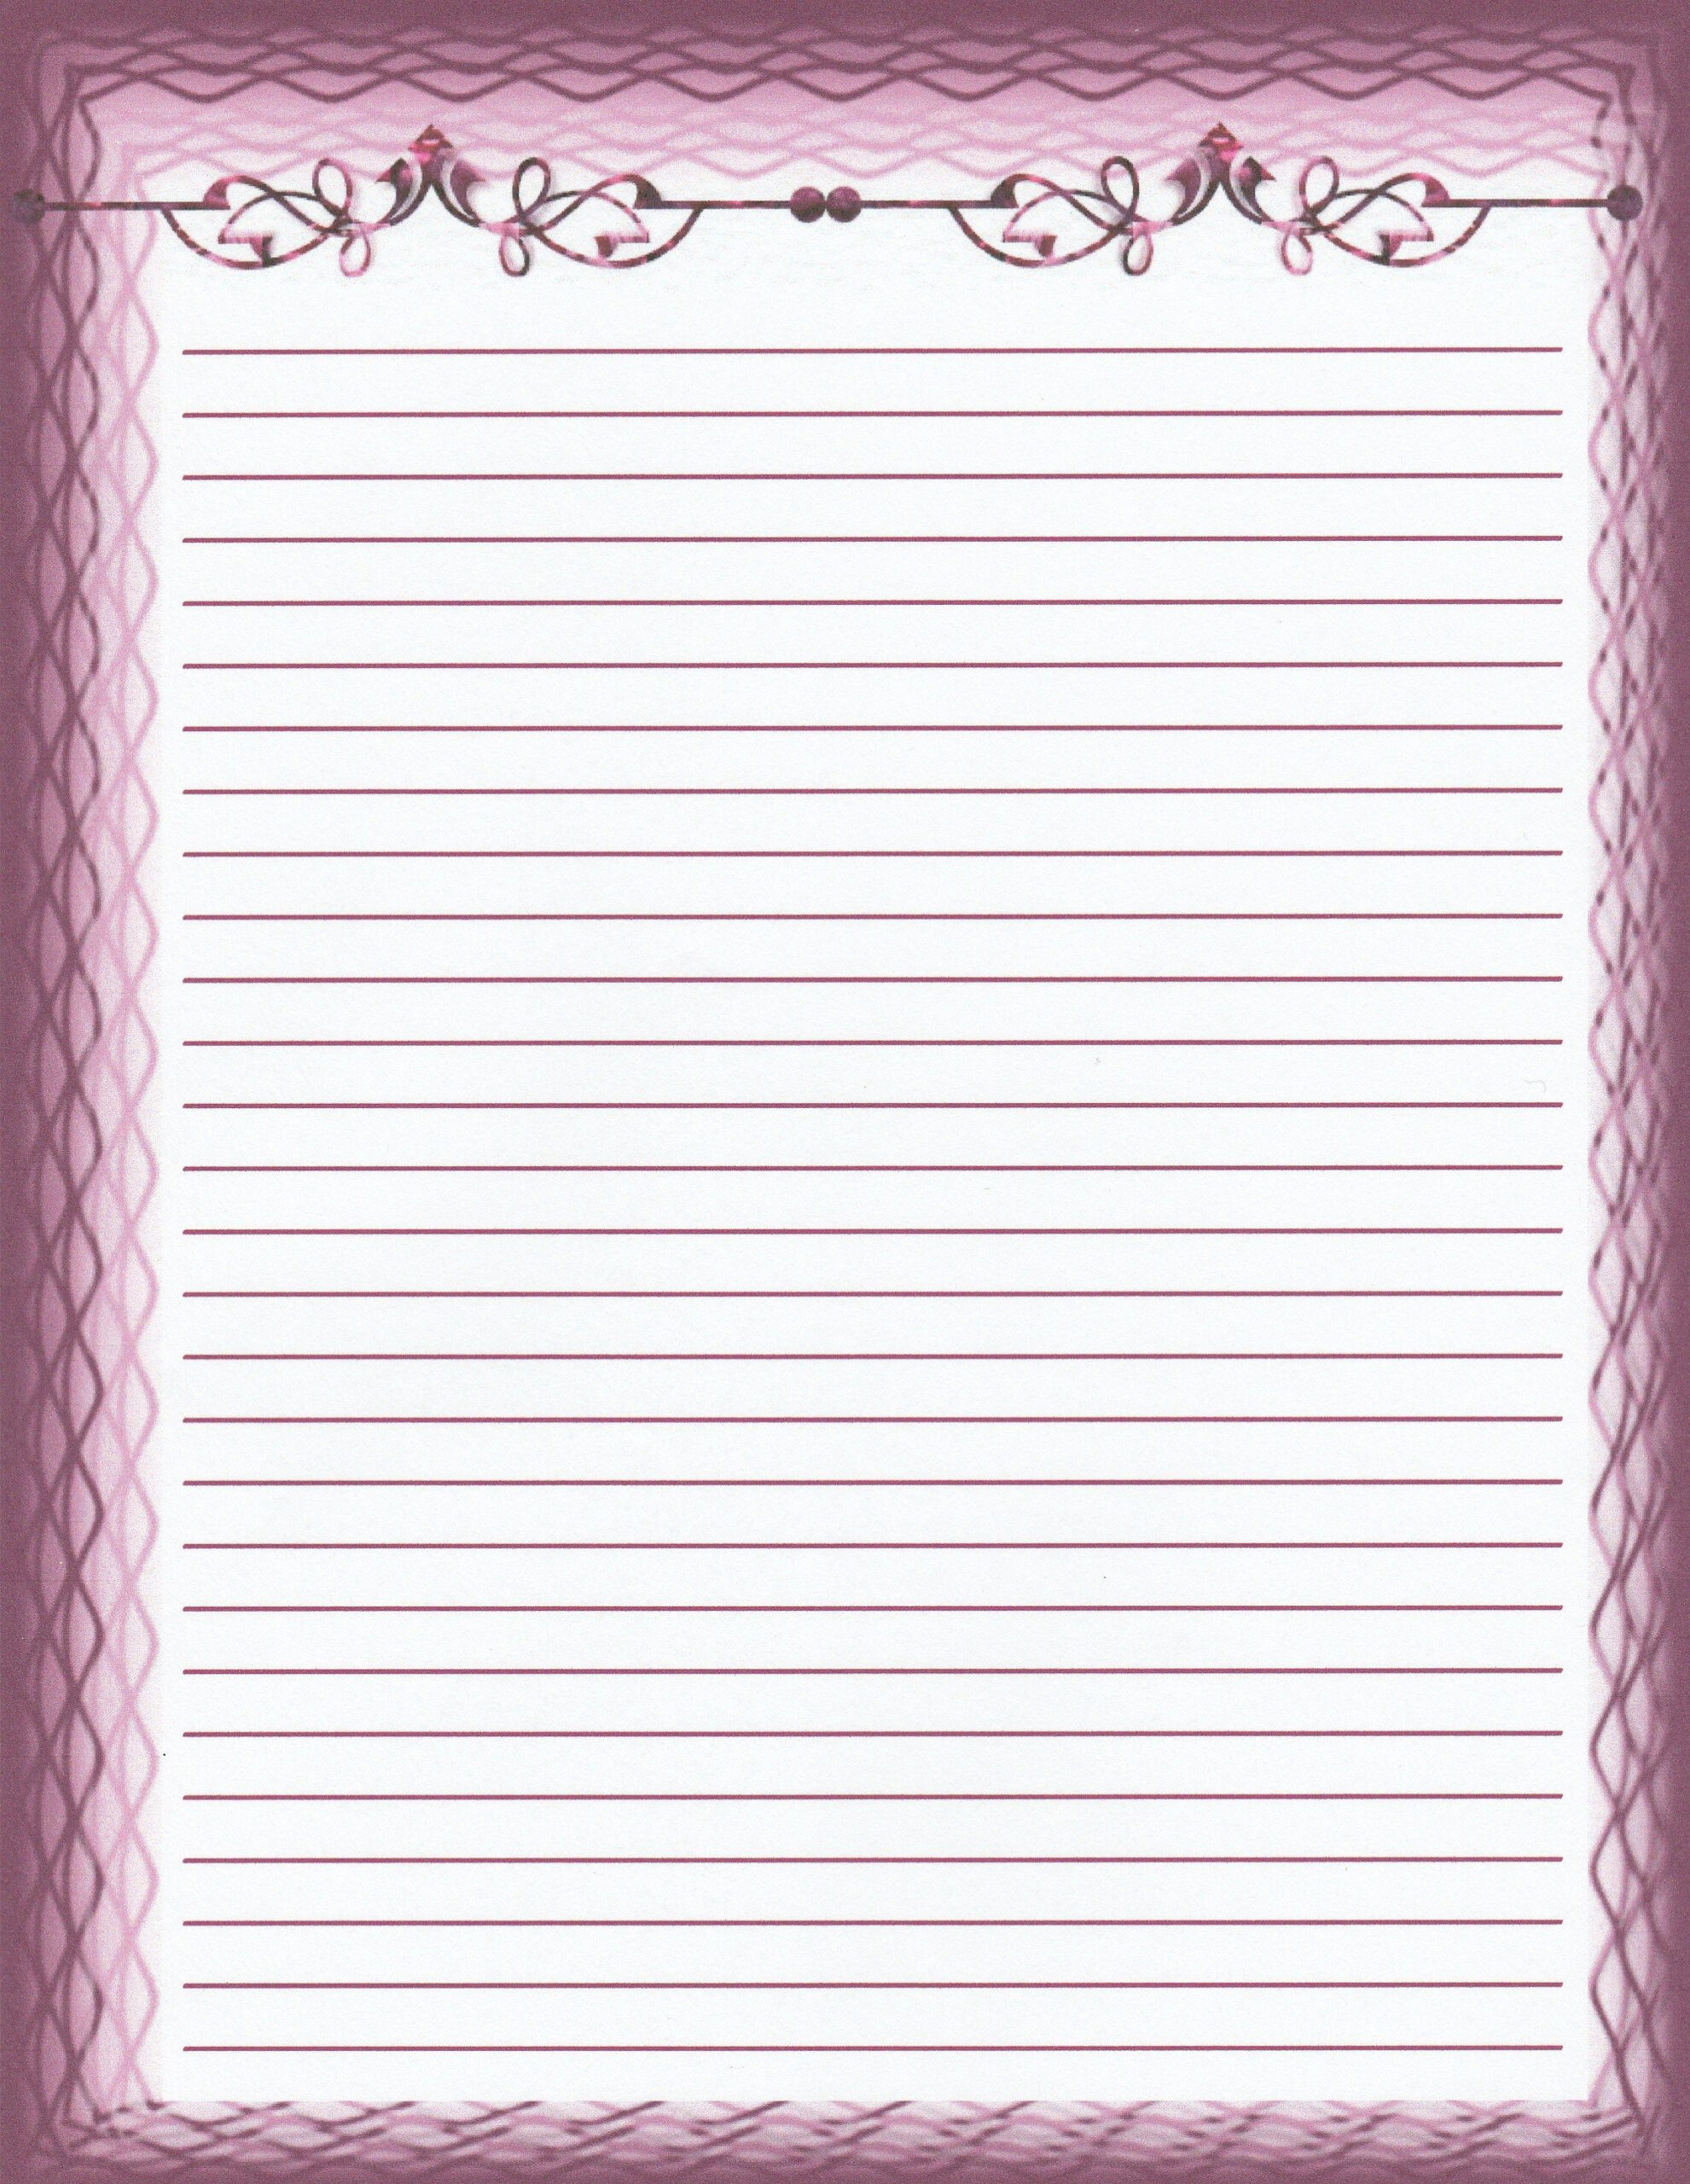 Stationery Lined Paper